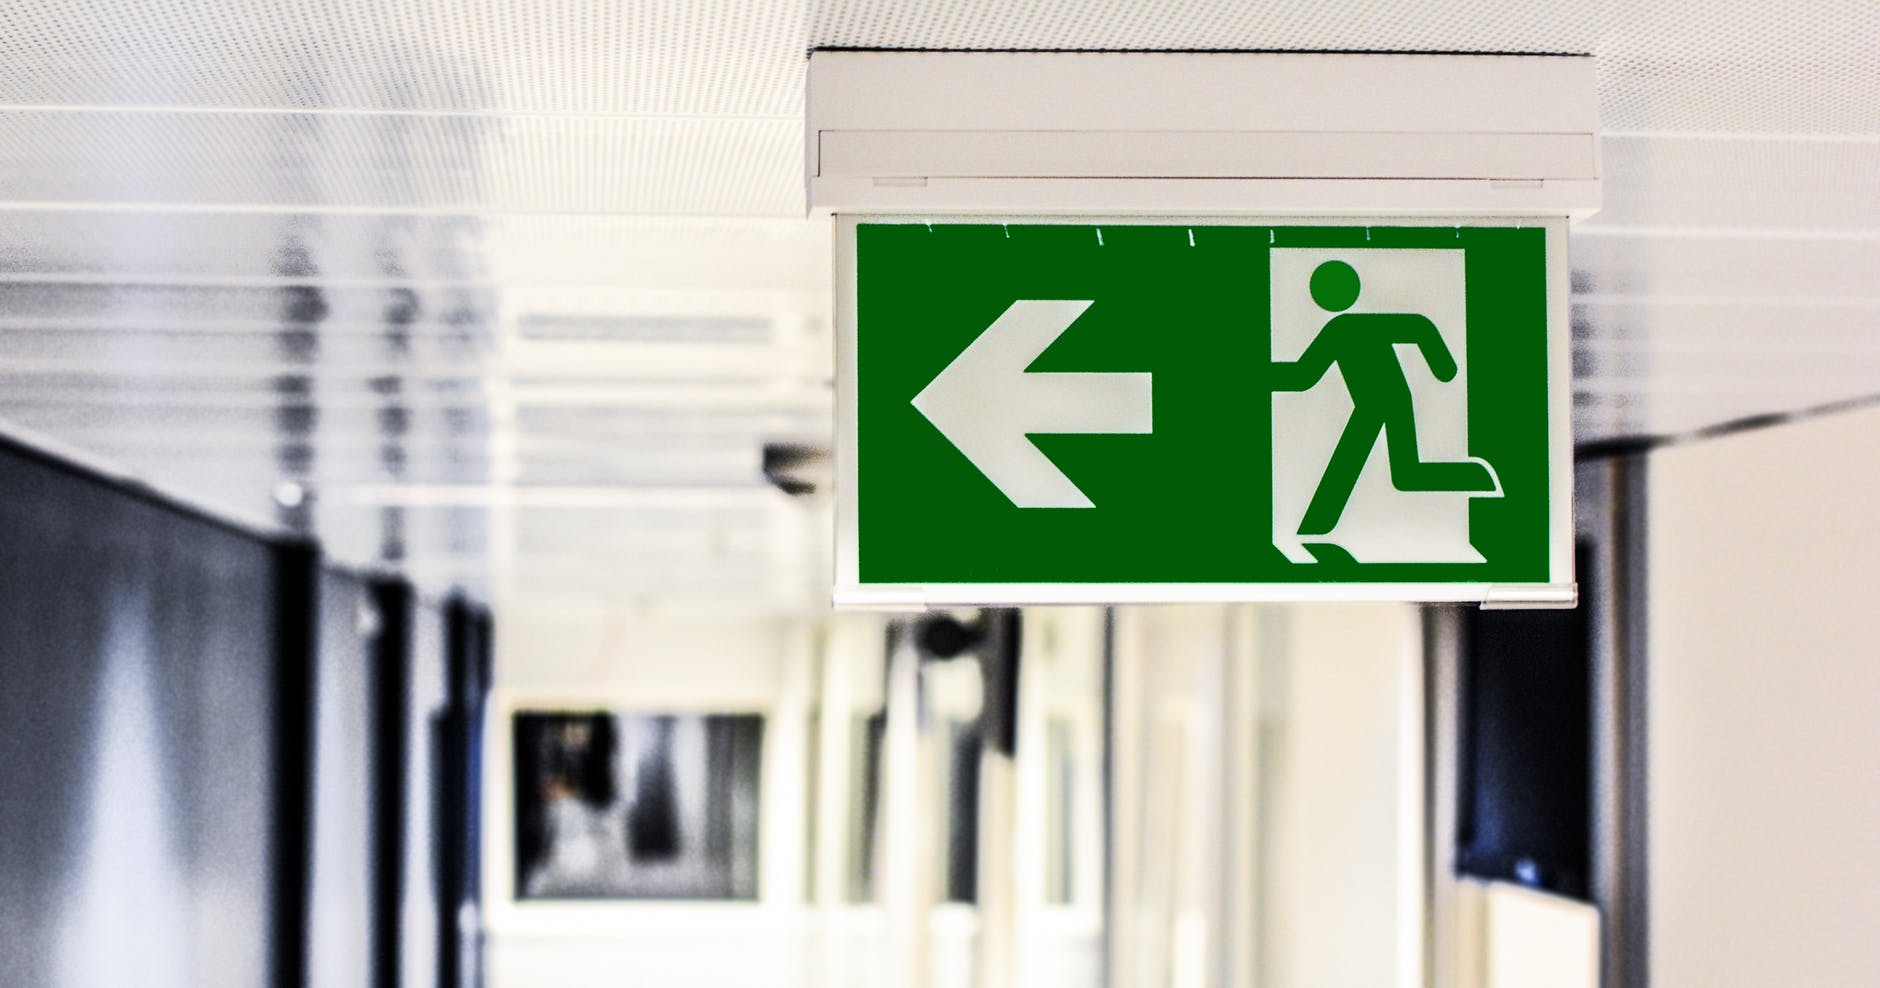 Why You Should Have Fire Safety at Work